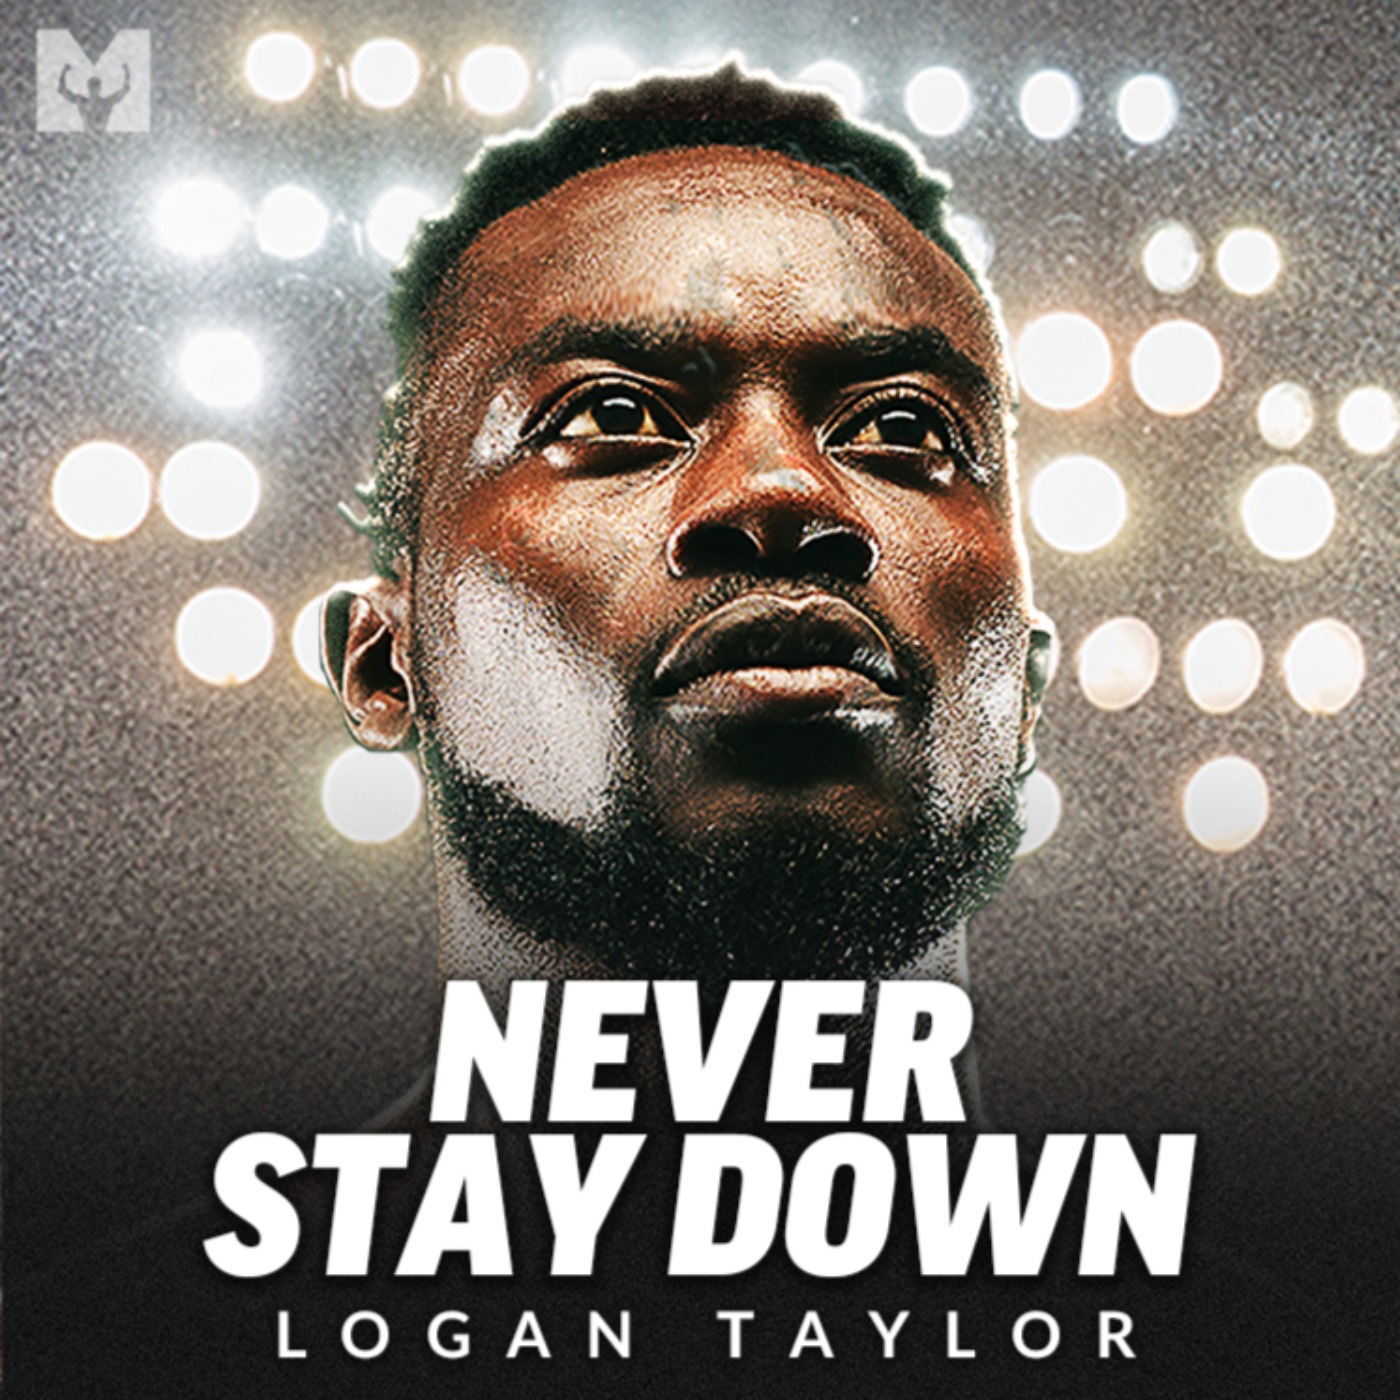 NEVER STAY DOWN